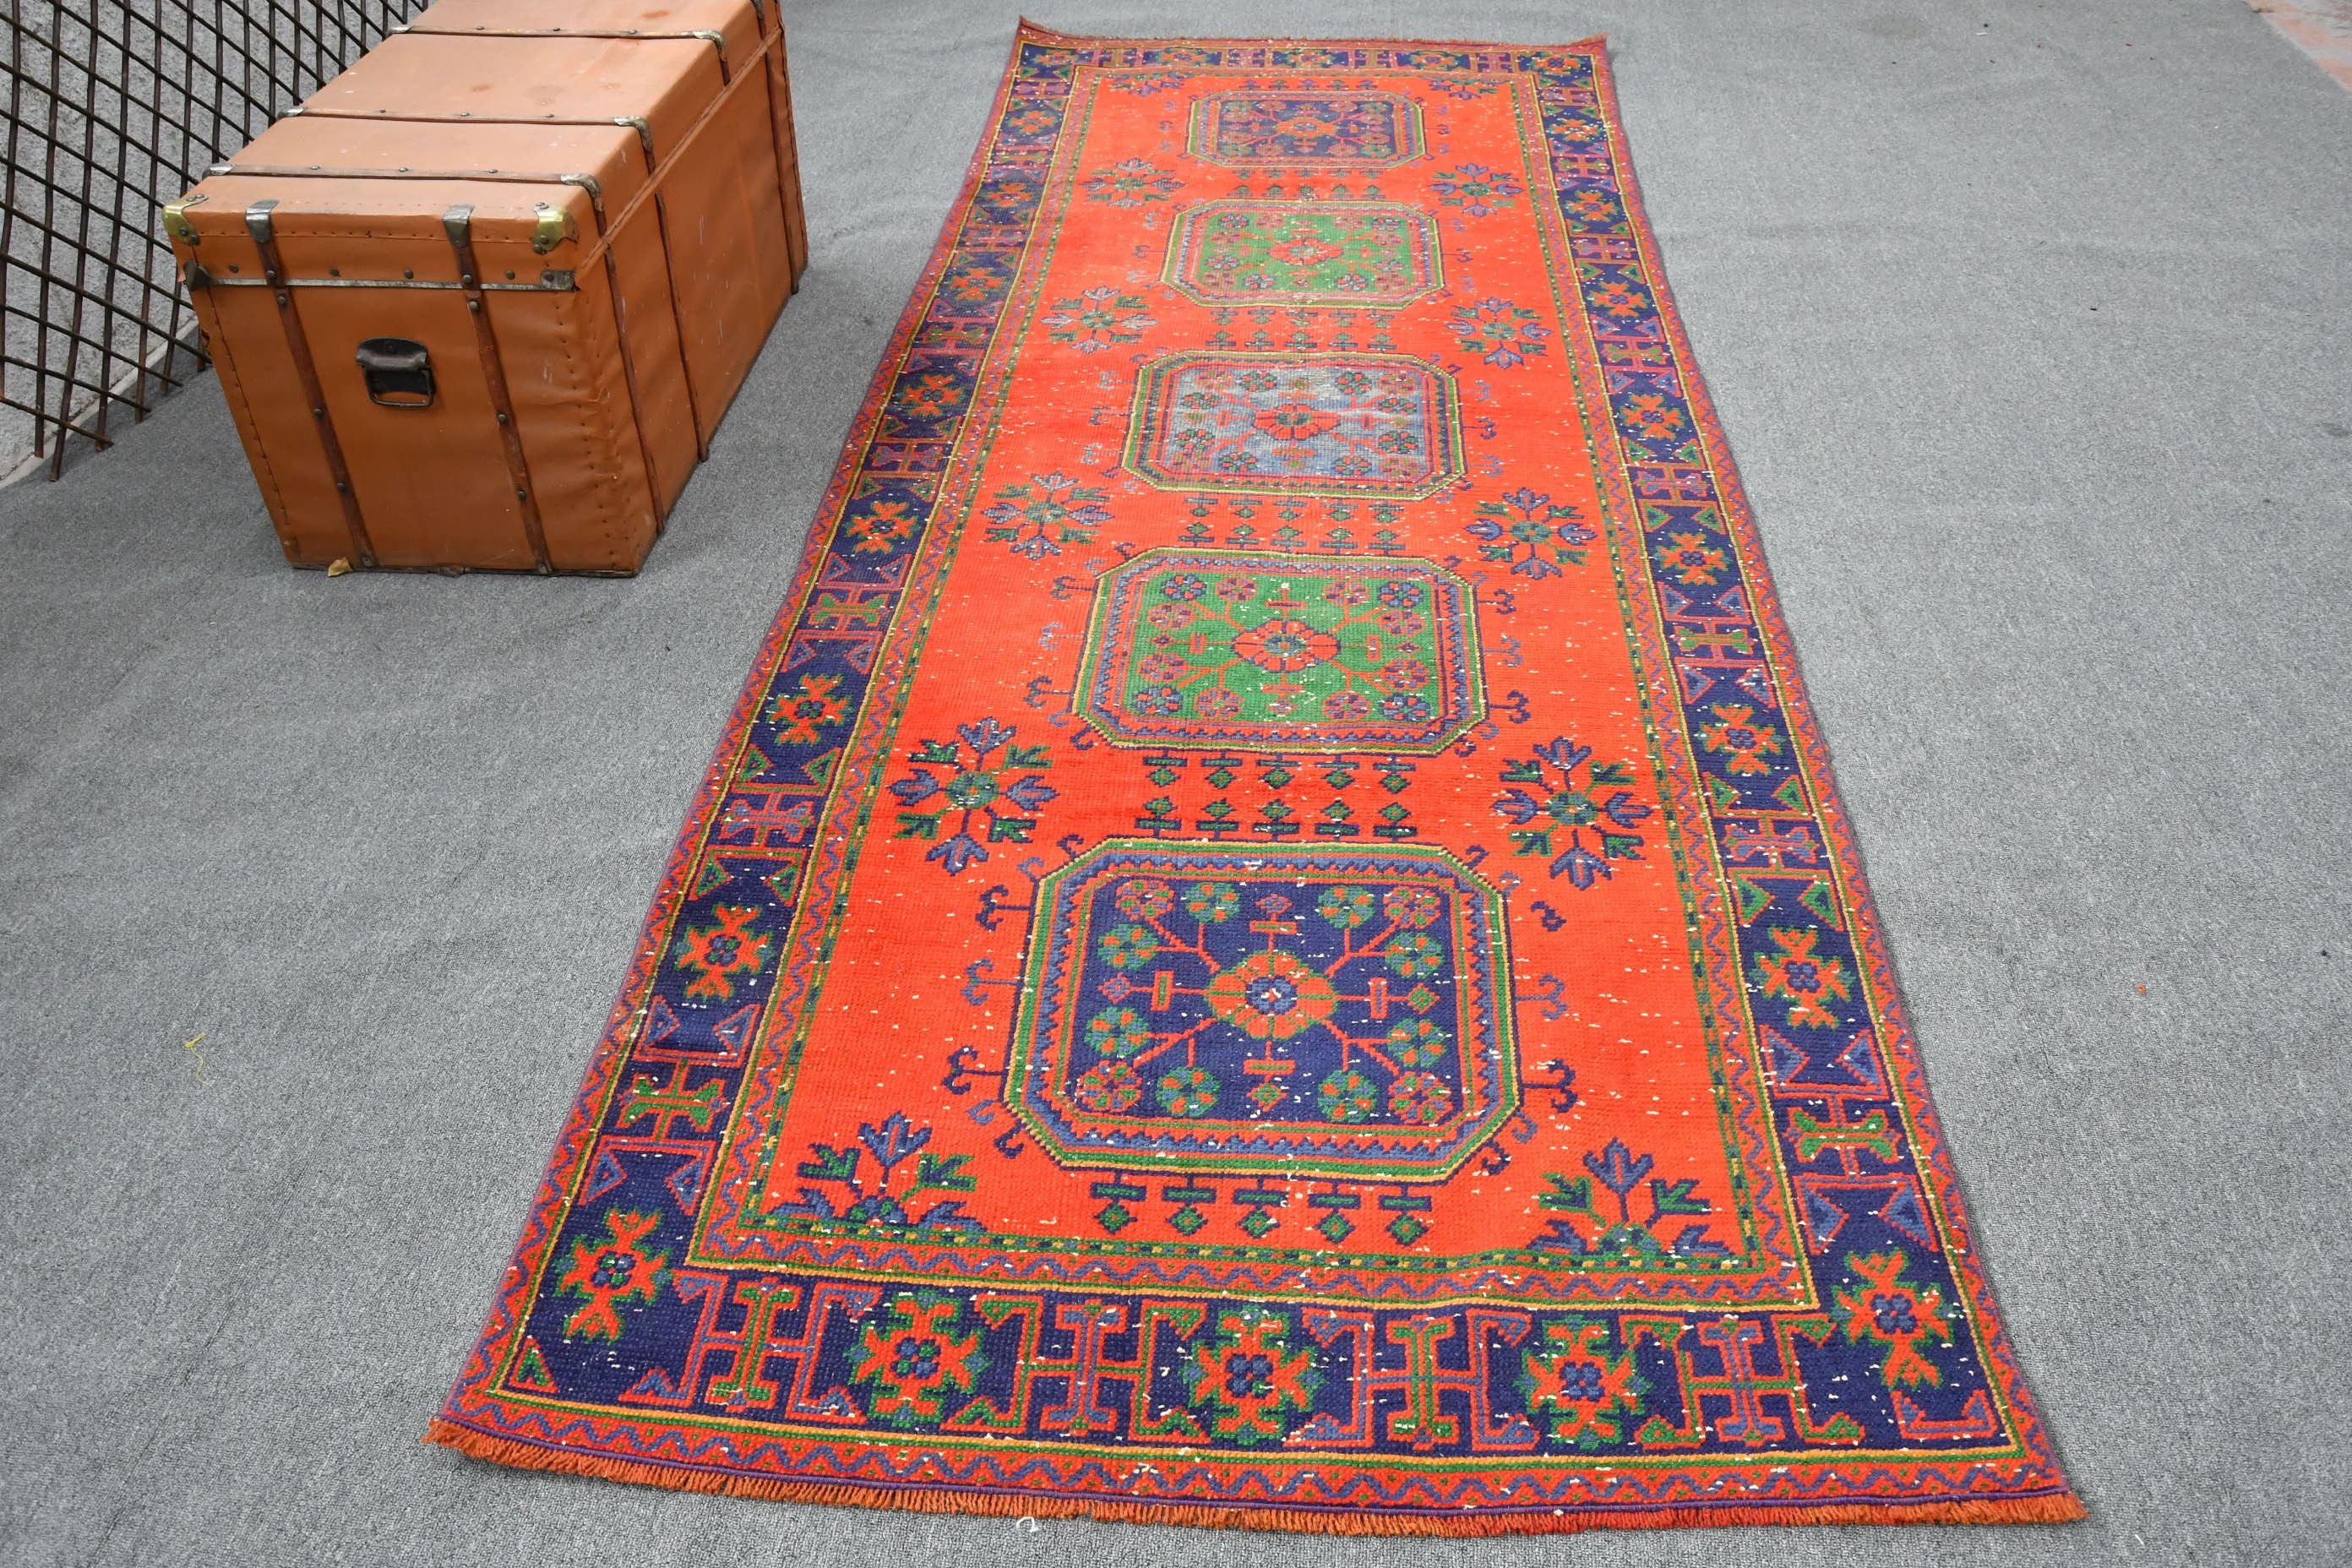 Rugs for Kitchen, Vintage Rugs, Red Cool Rug, 4.1x11.1 ft Runner Rug, Anatolian Rugs, Floor Rug, Kitchen Rug, Turkish Rugs, Stair Rugs